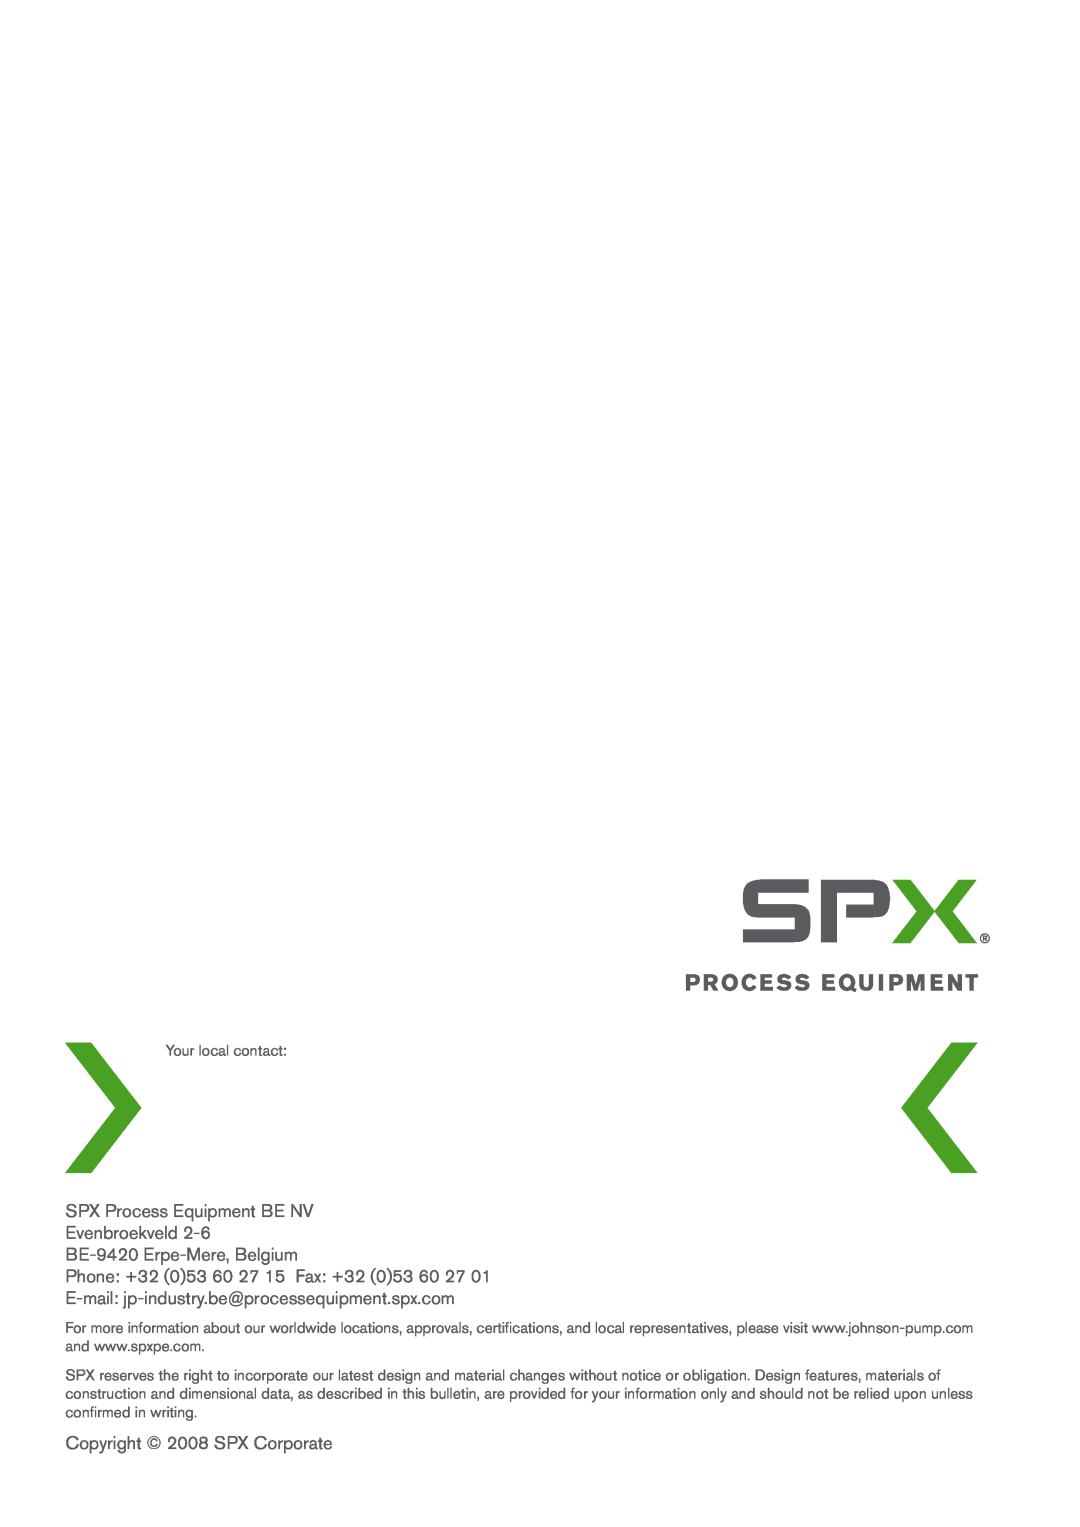 SPX Cooling Technologies TG MAG58-80, TG MAG185-125 SPX Process Equipment BE NV Evenbroekveld, BE-9420 Erpe-Mere,Belgium 